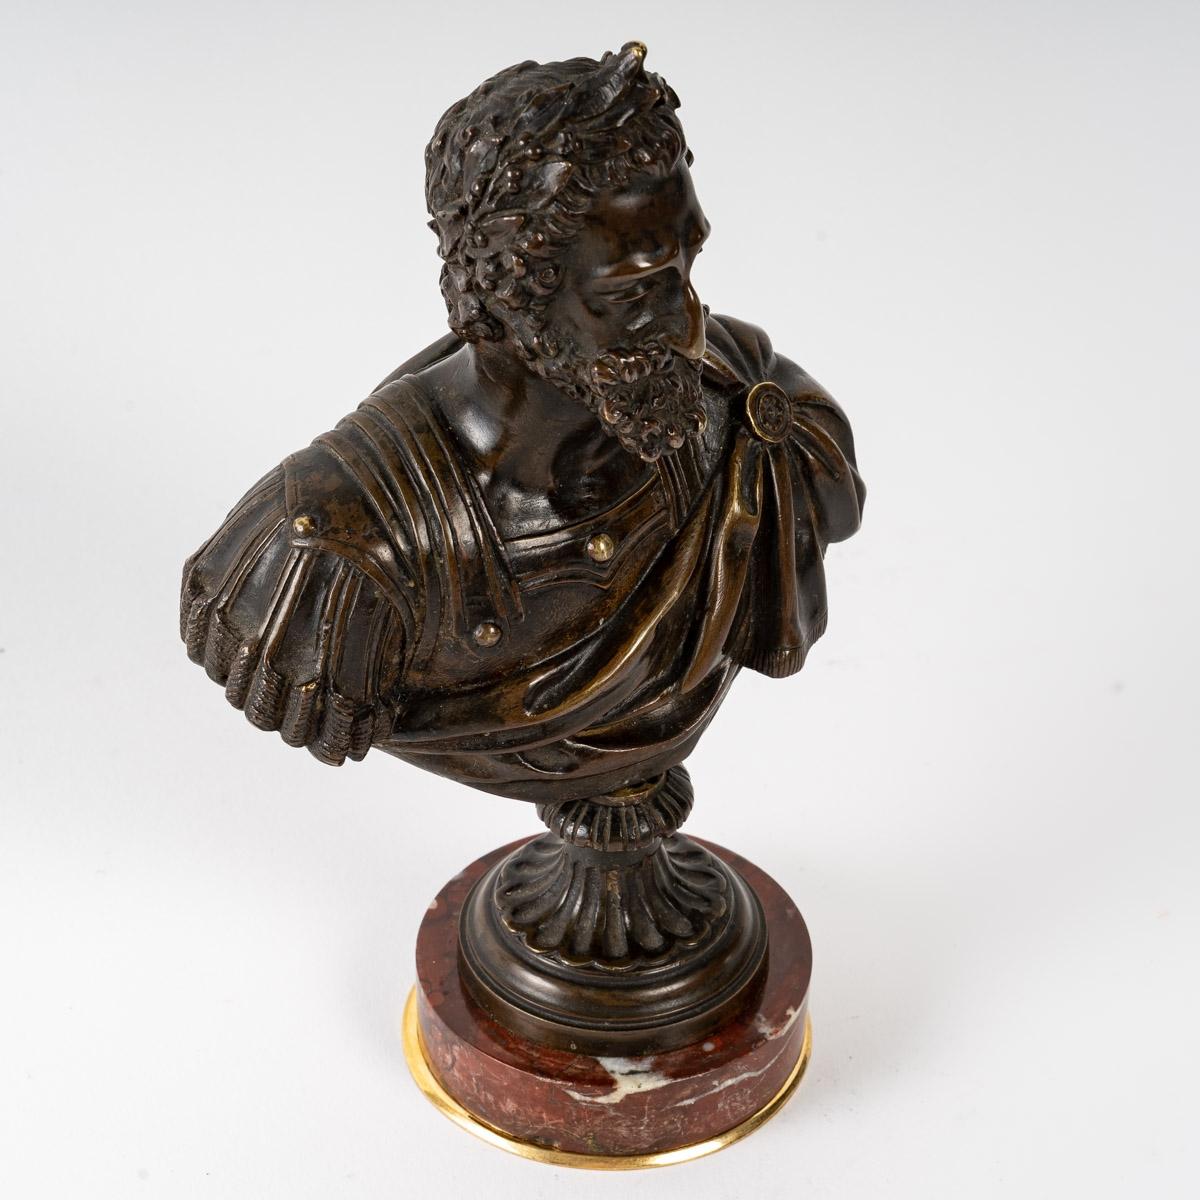 19th Century bronze and marble bust of King Henry IV

Sculpture representing a bust of King Henry IV of the 19th century in bronze and marble base.

Dimensions: H: 19cm, W: 12cm, D: 6,5cm.